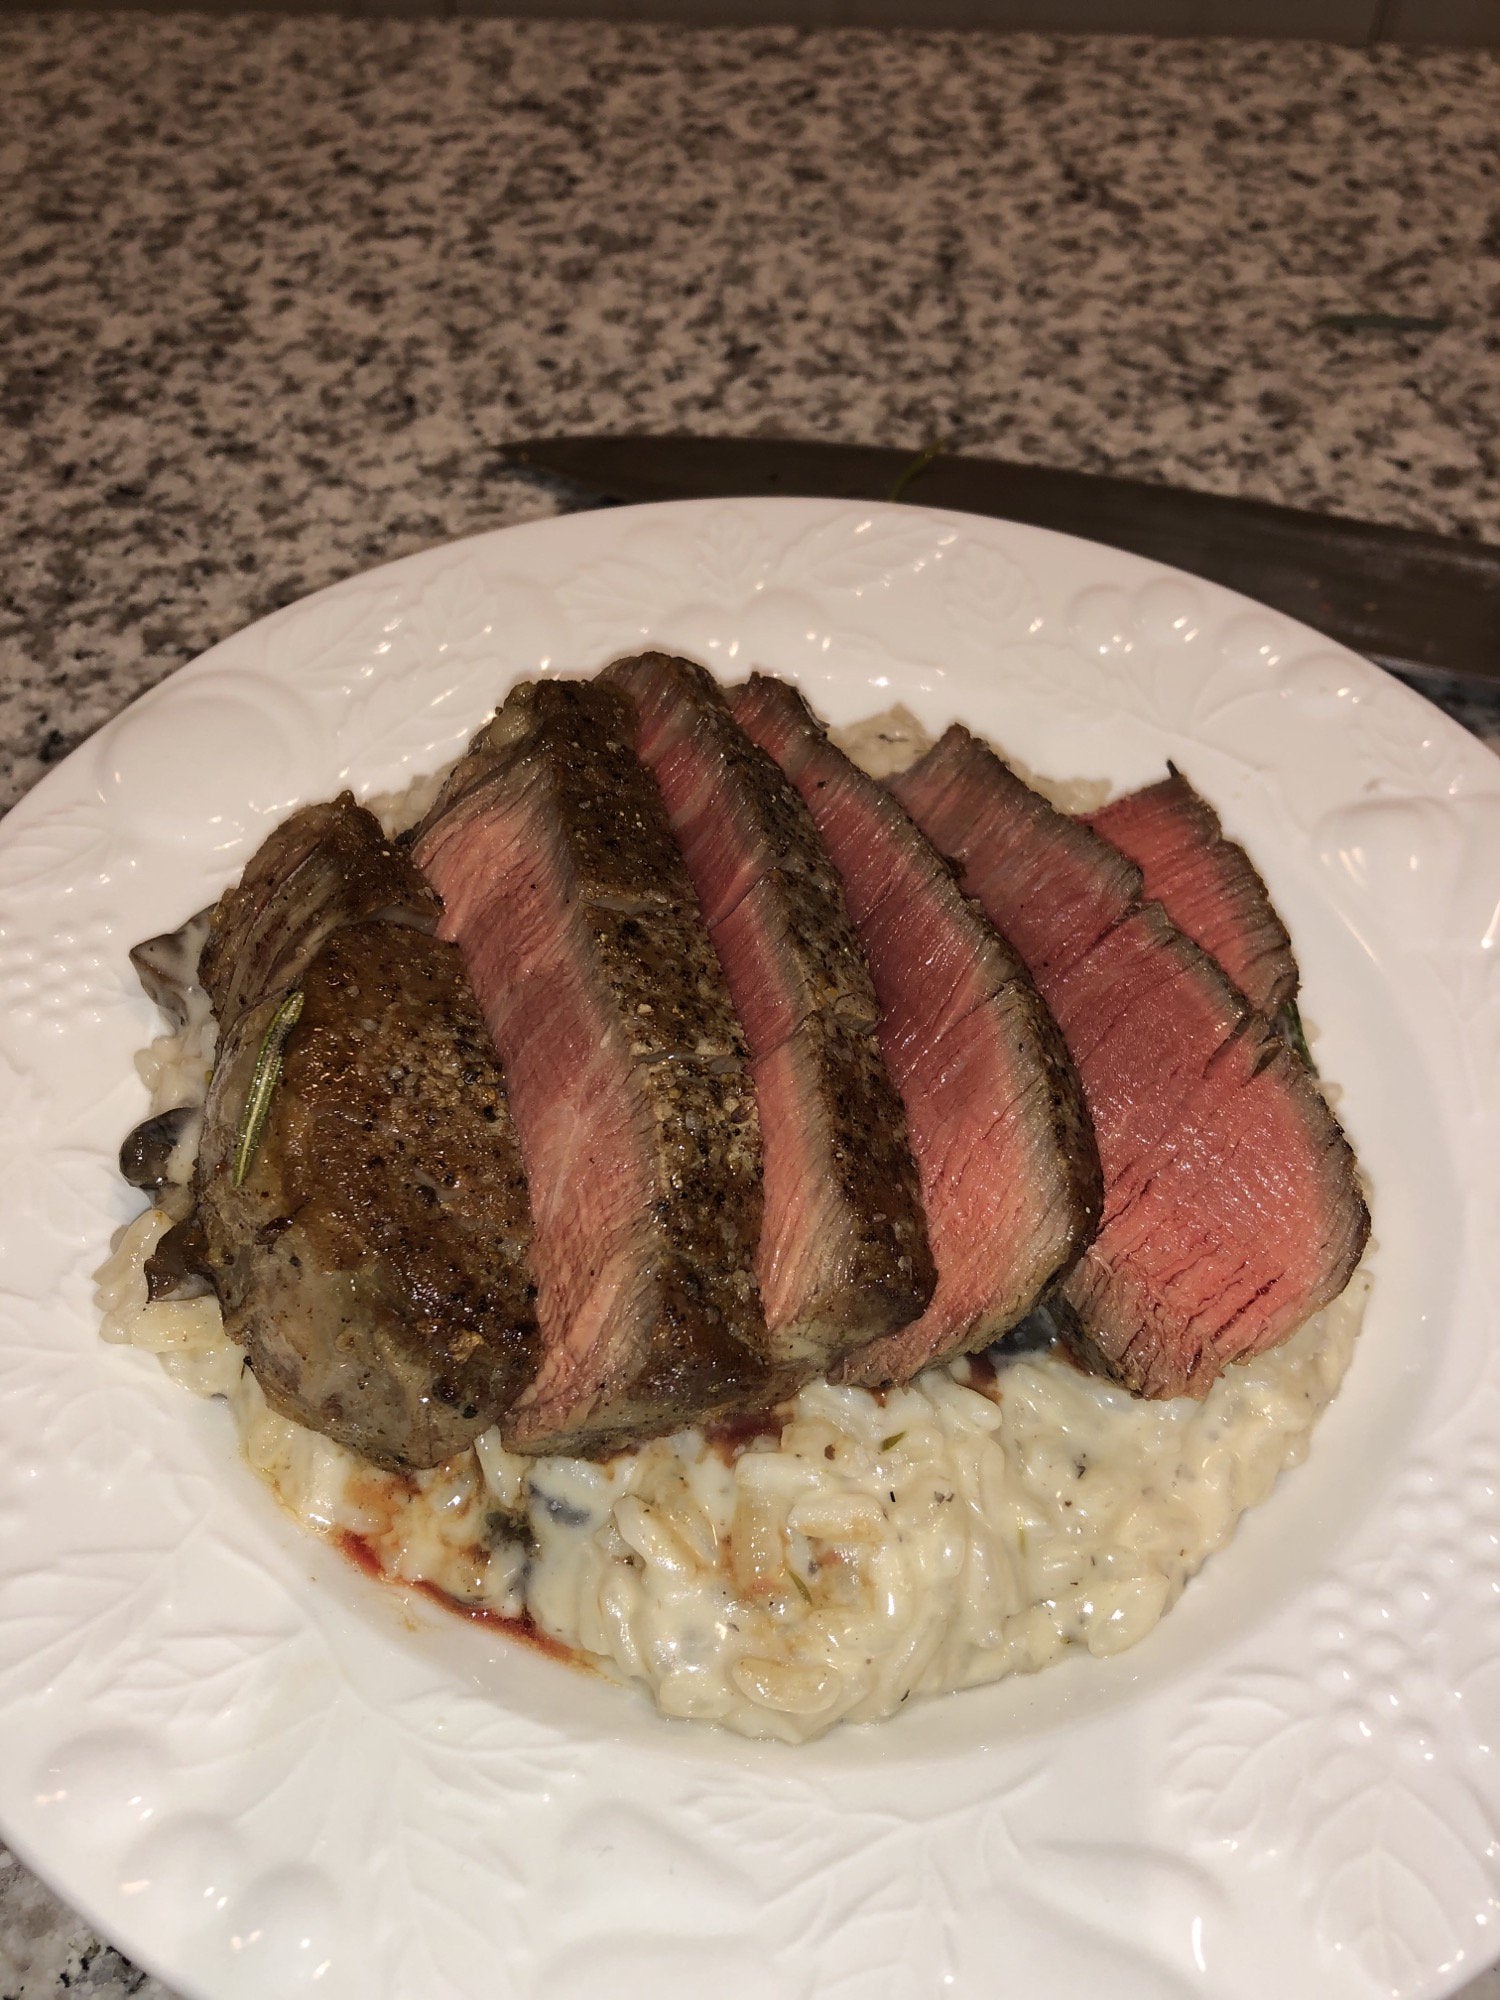 Filet mignon and wild mushroom risotto. A Tuesday night of luxury ...